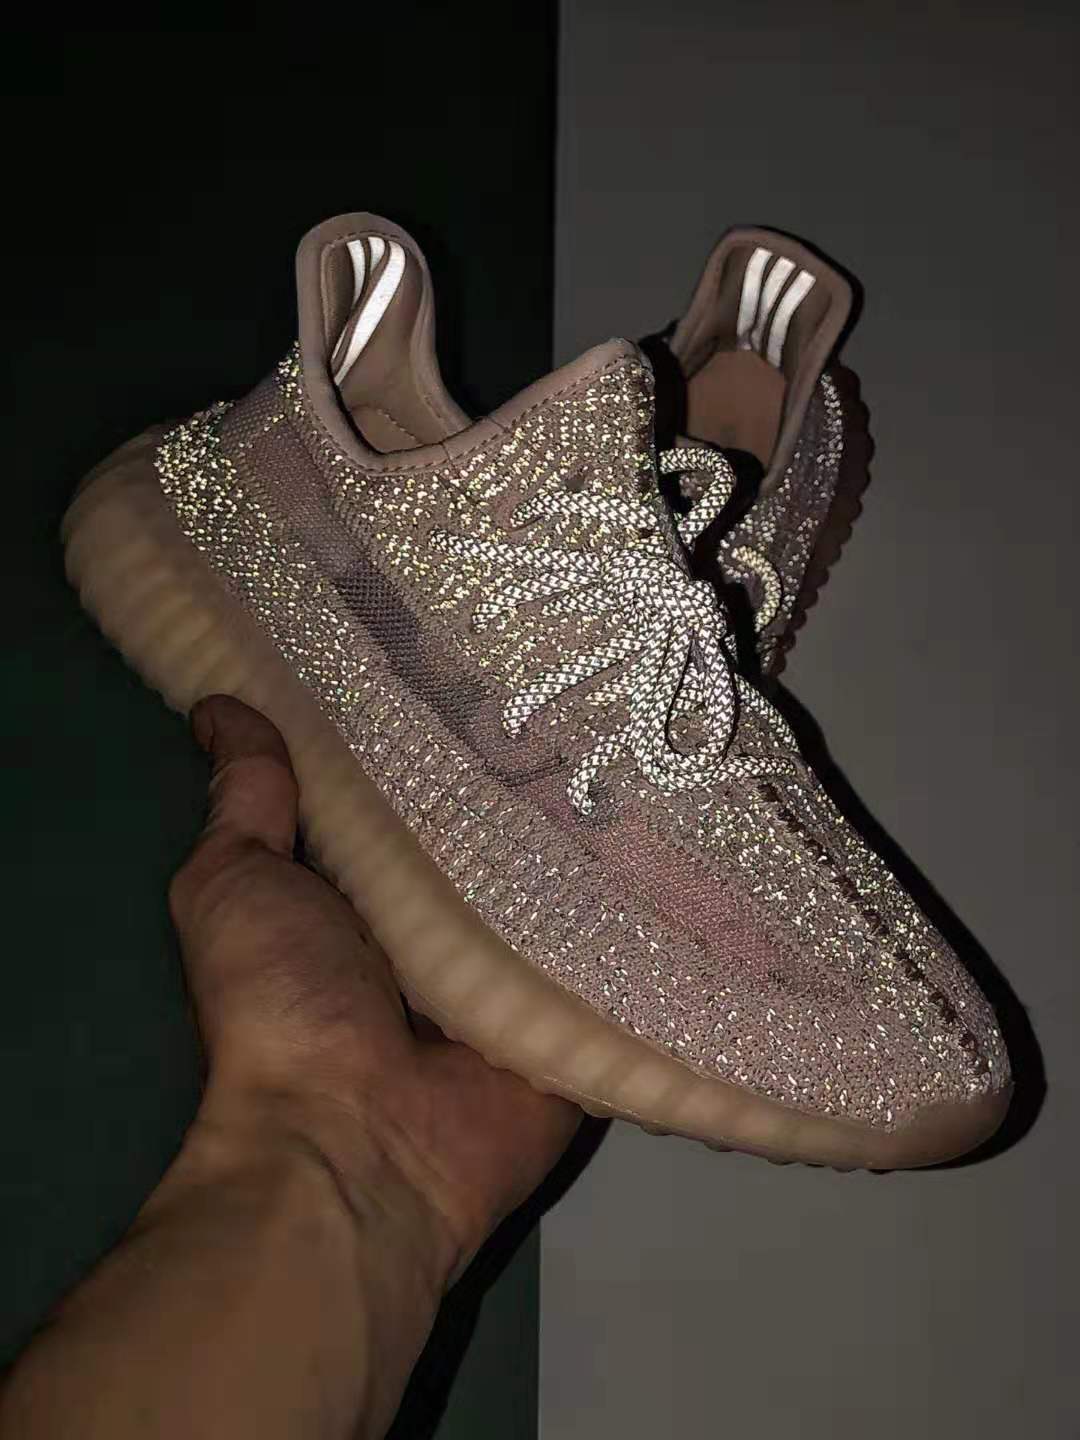 Adidas Yeezy Boost 350 V2 Synth Non-Reflective FV5578 - Exclusive Footwear for Every Sneaker Enthusiast